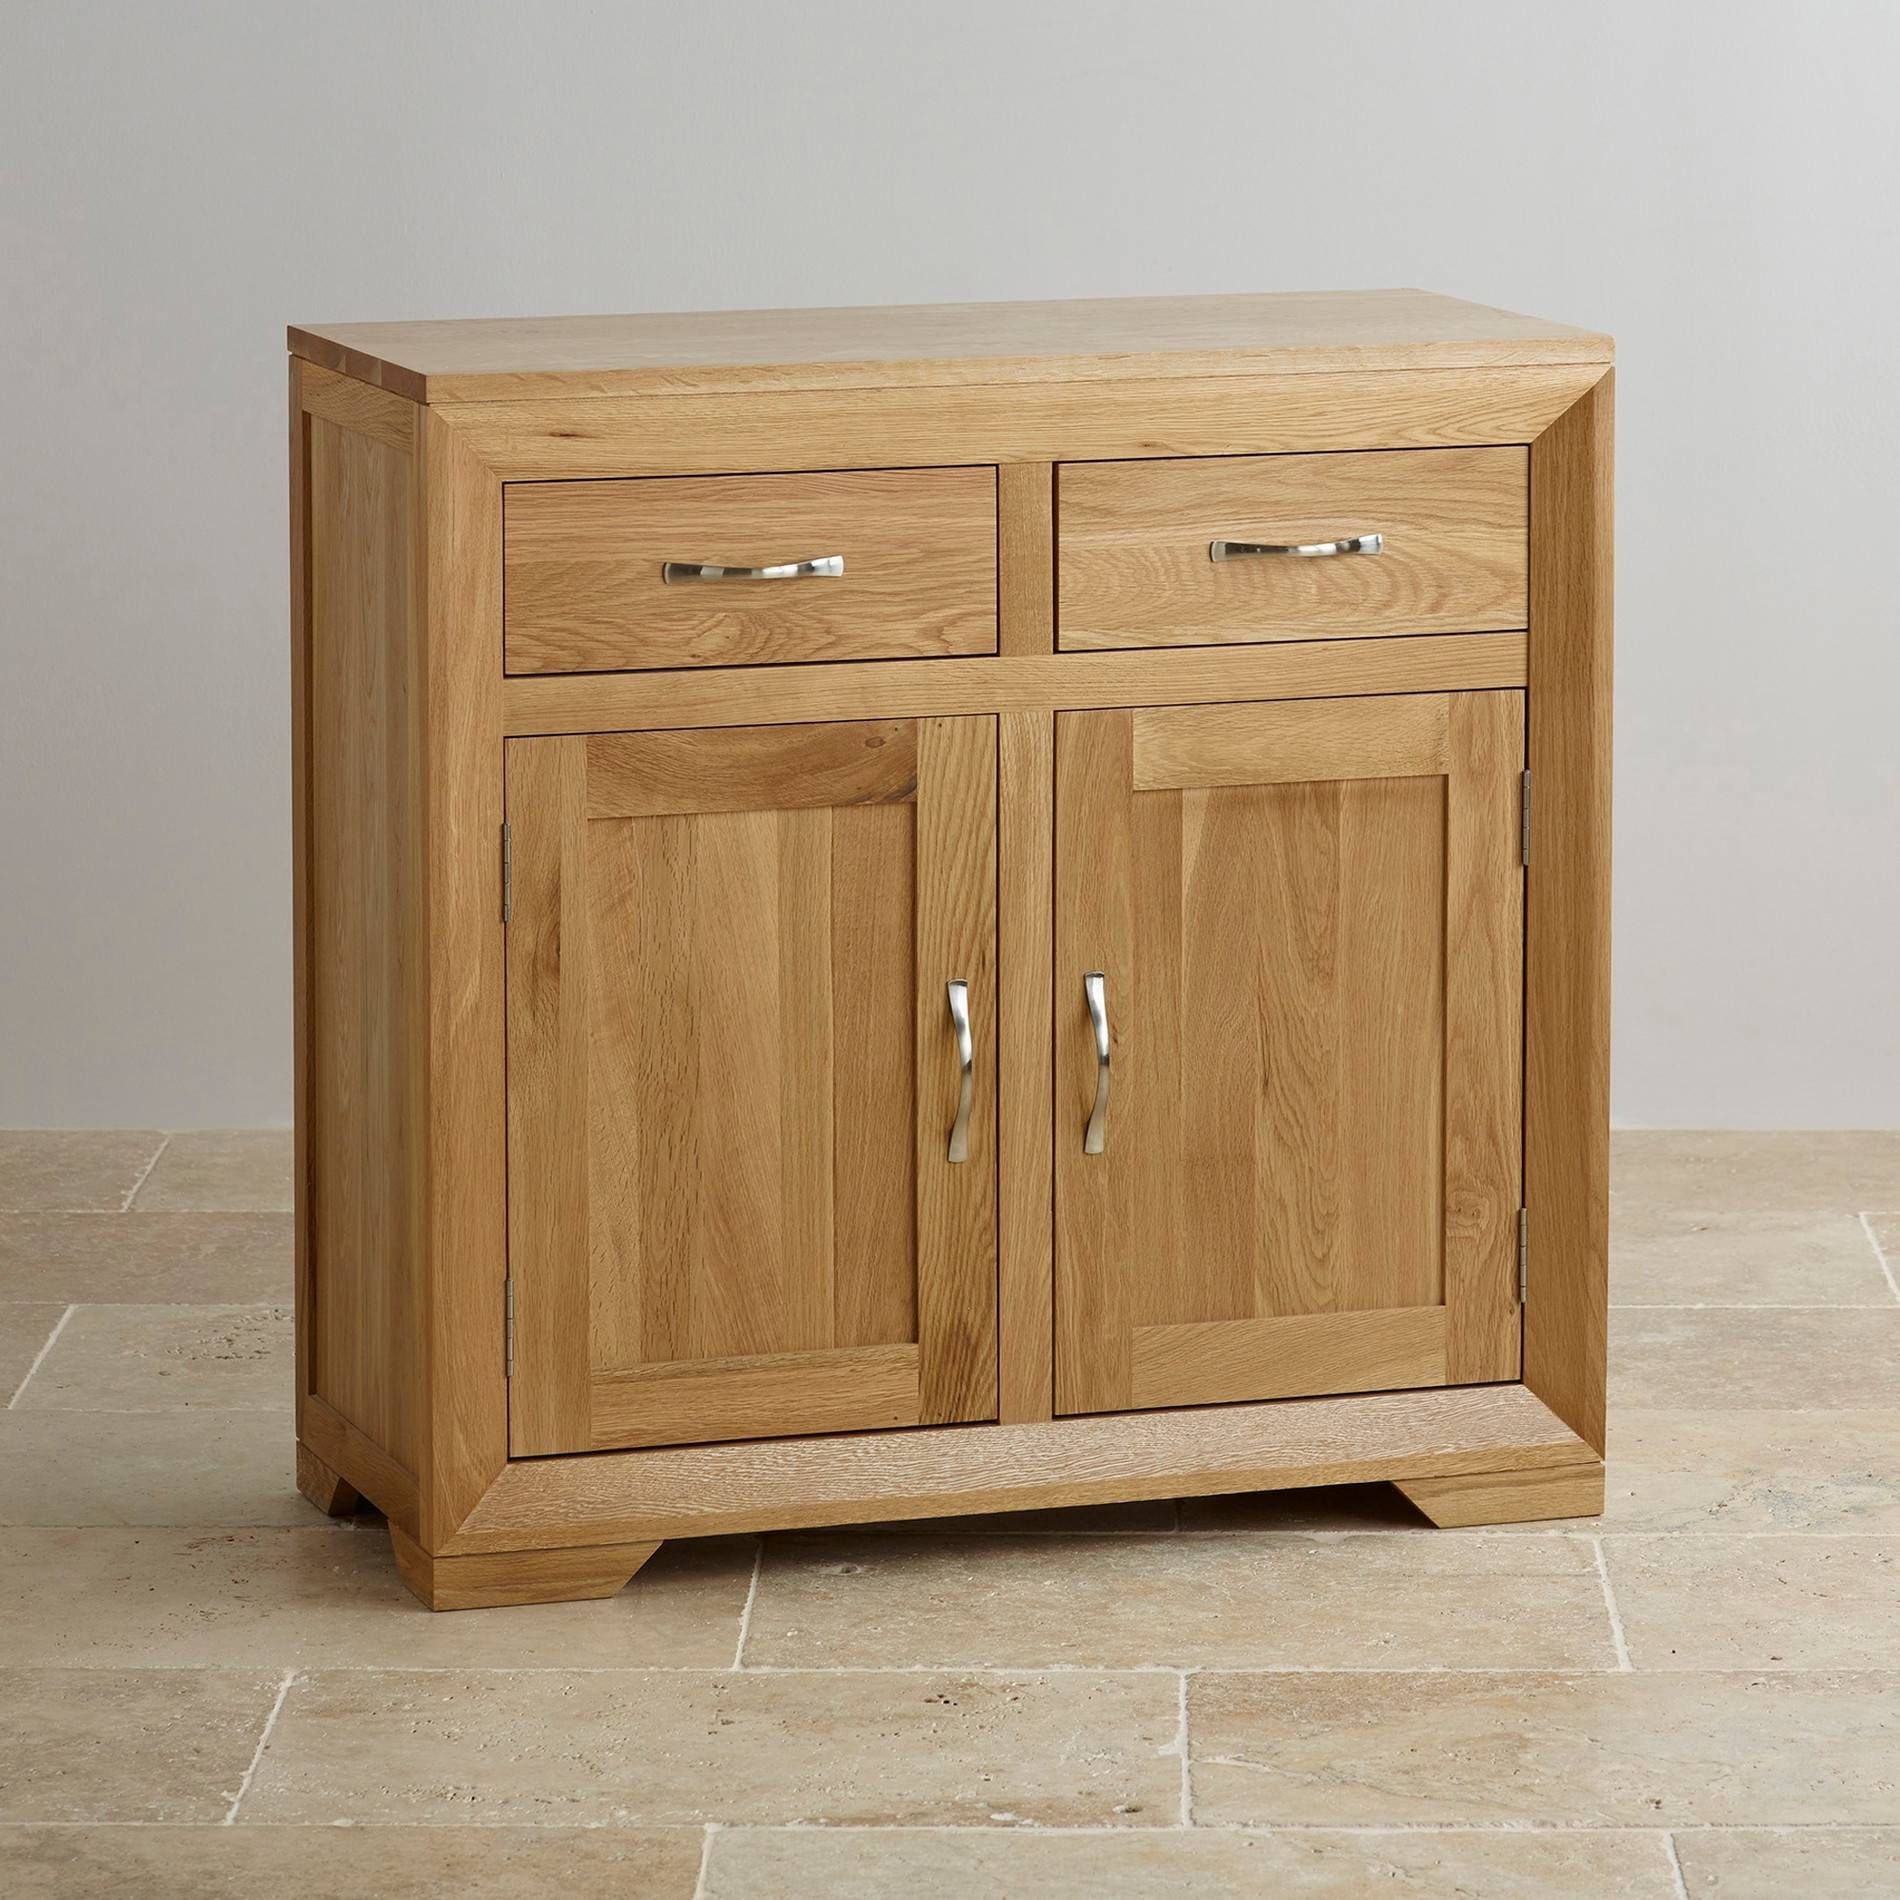 Elegant Small Solid Oak Sideboard – Buildsimplehome Within Recent Chunky Oak Sideboards (View 8 of 15)